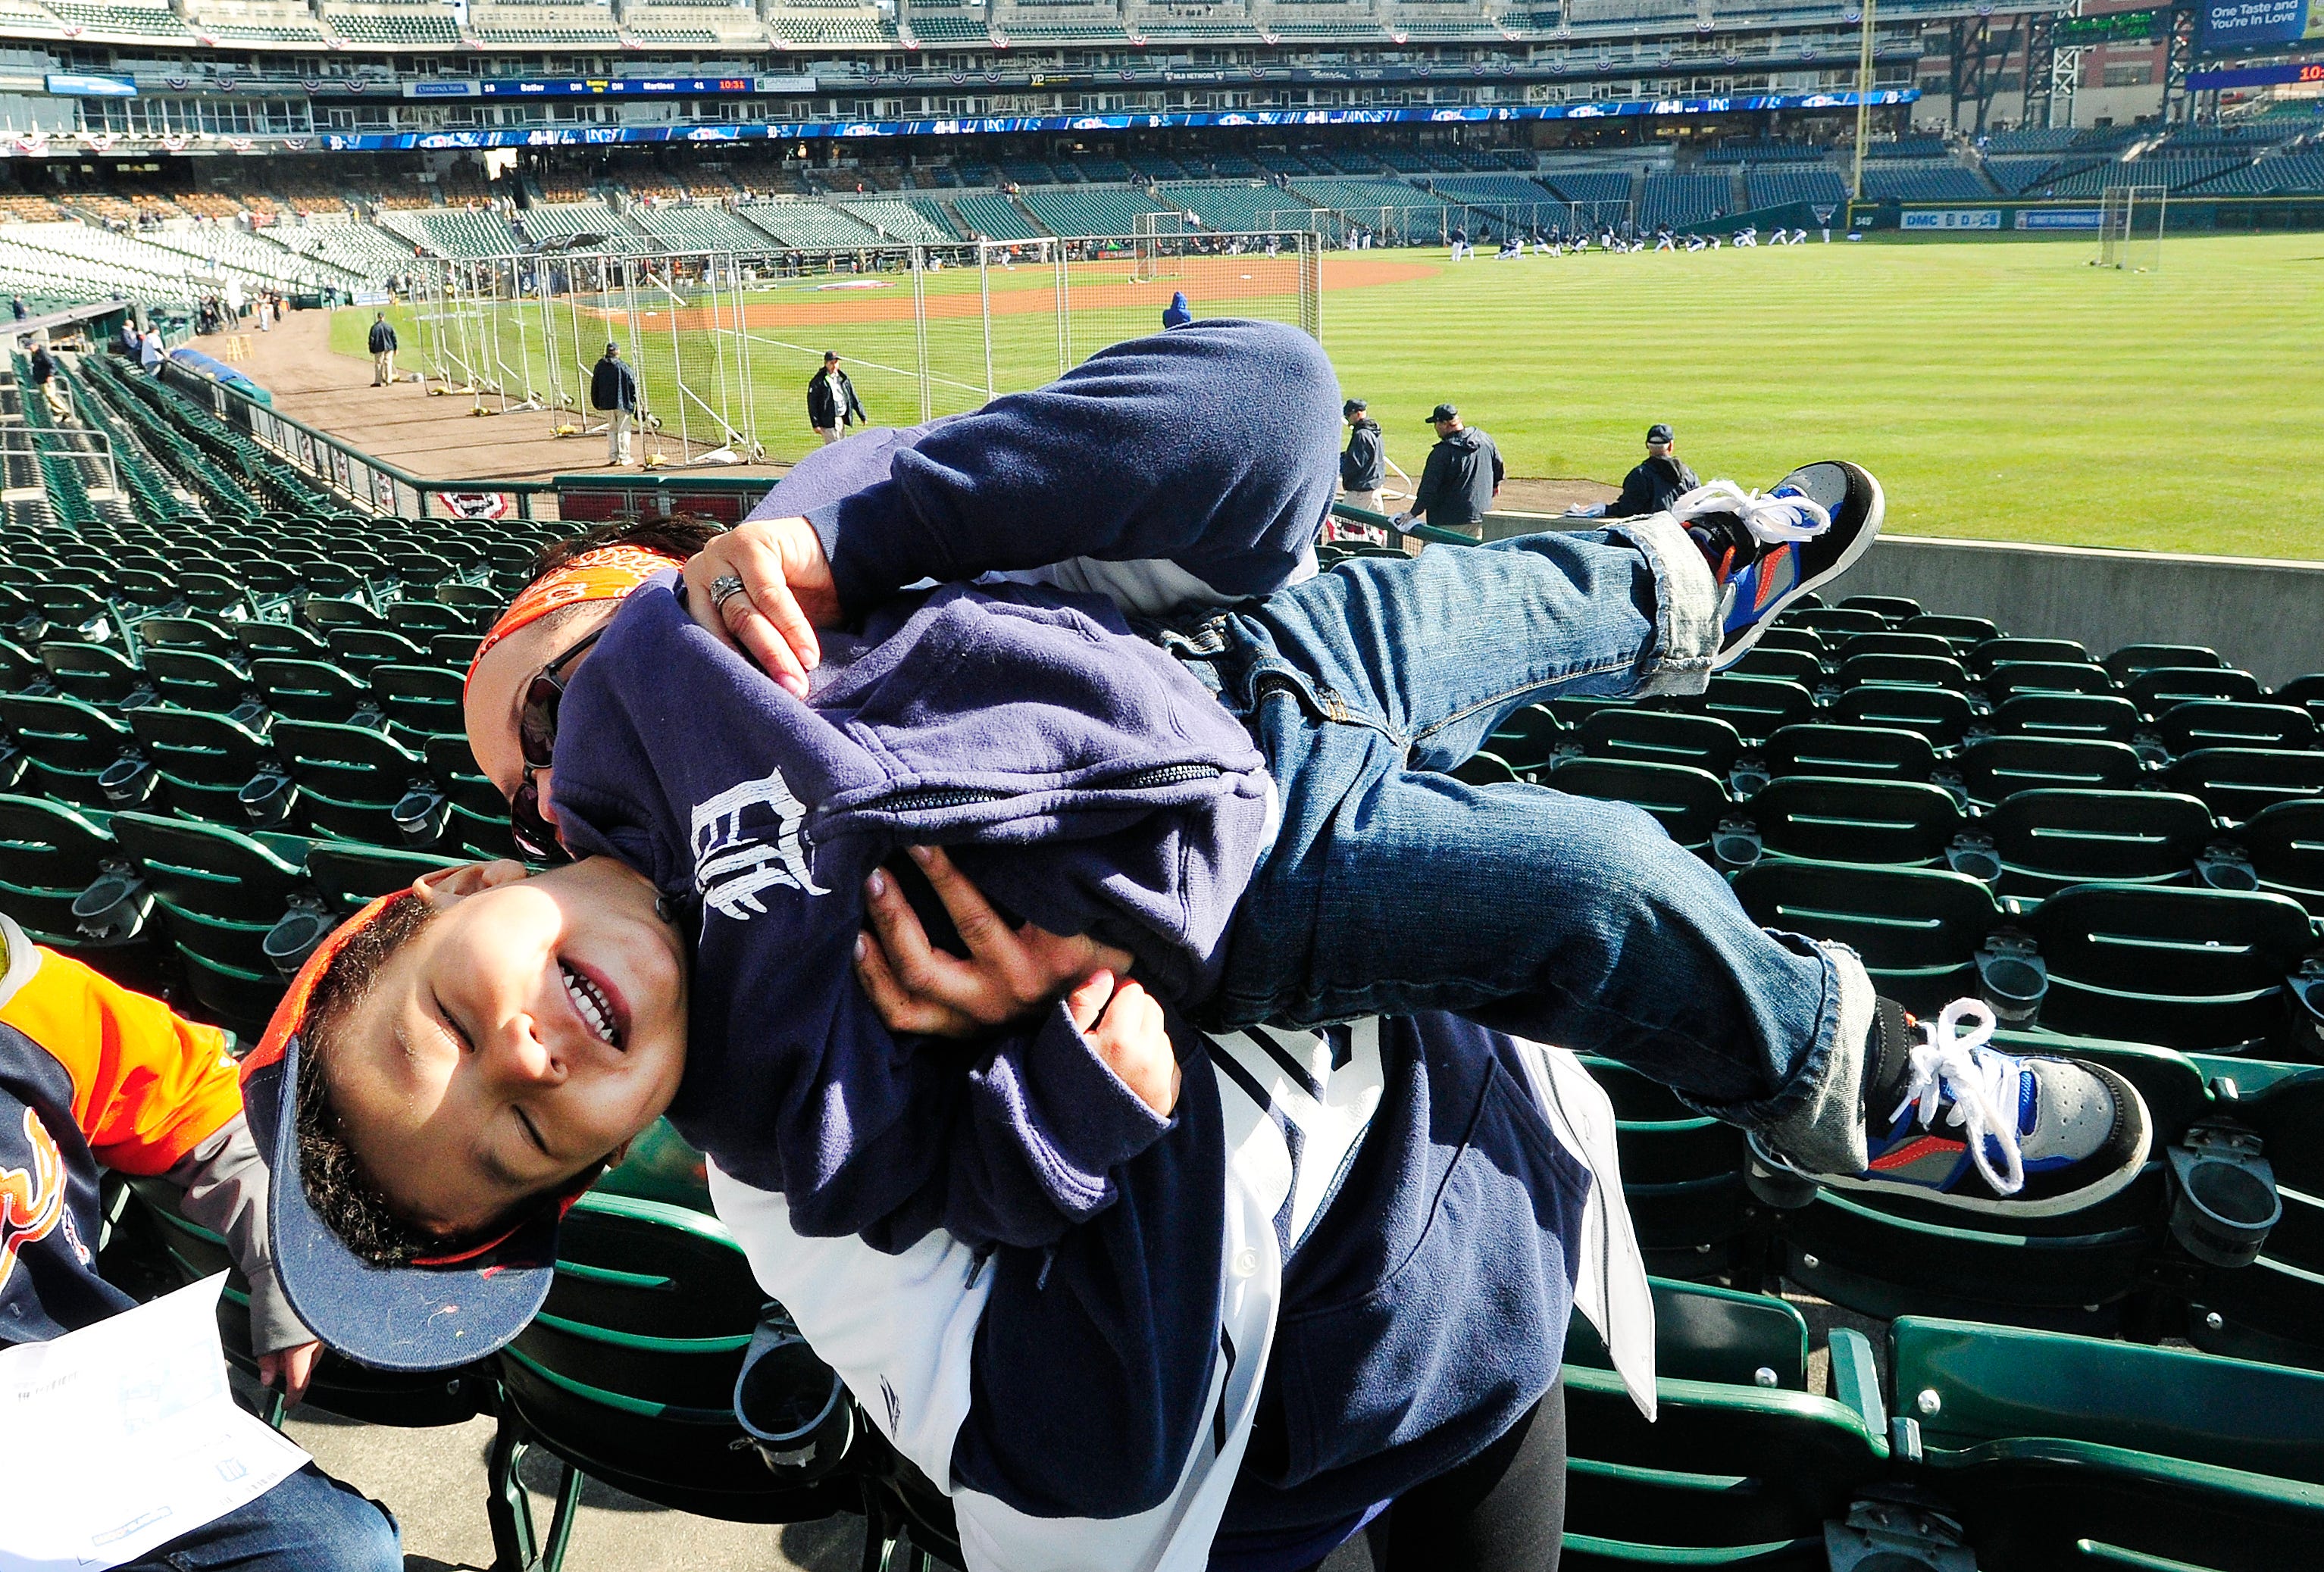 Adam Canedo, 2, enjoys his first Detroit Tigers Opening Day with his mother Crystal Canedo out in the stands down the first base line. Detroit Tigers Opening Day vs the Kansas City Royal at Comerica Park in Detroit, Michigan on March 31, 2014.